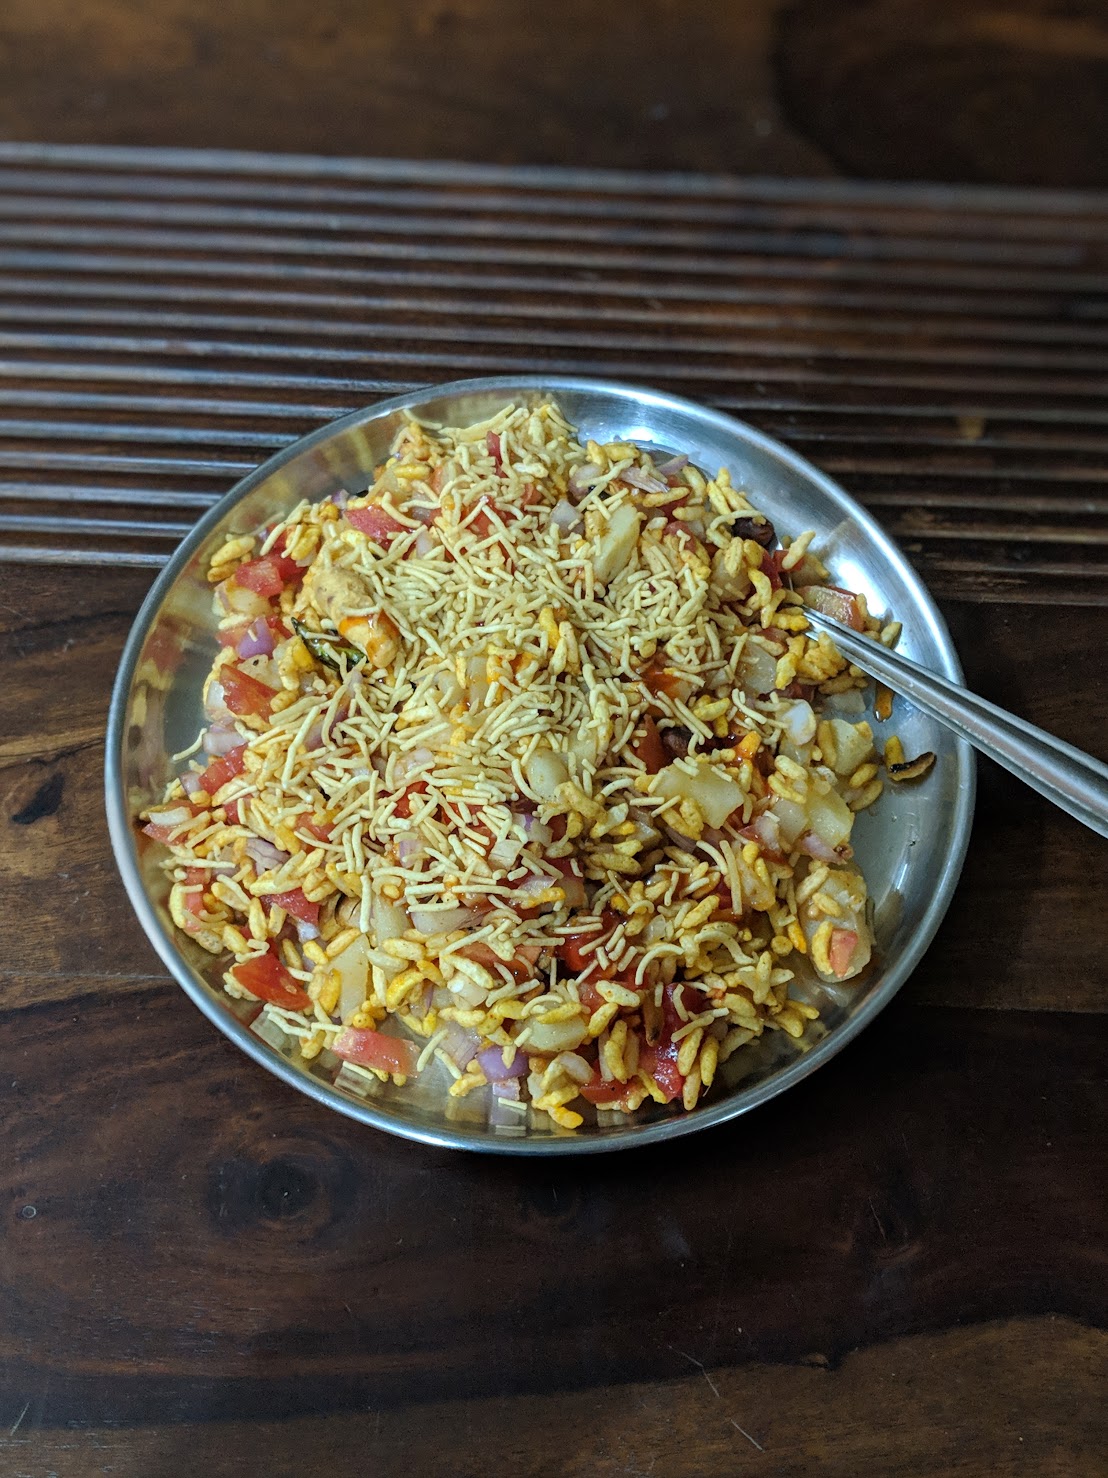 Delicious bhel puri served in a plate.